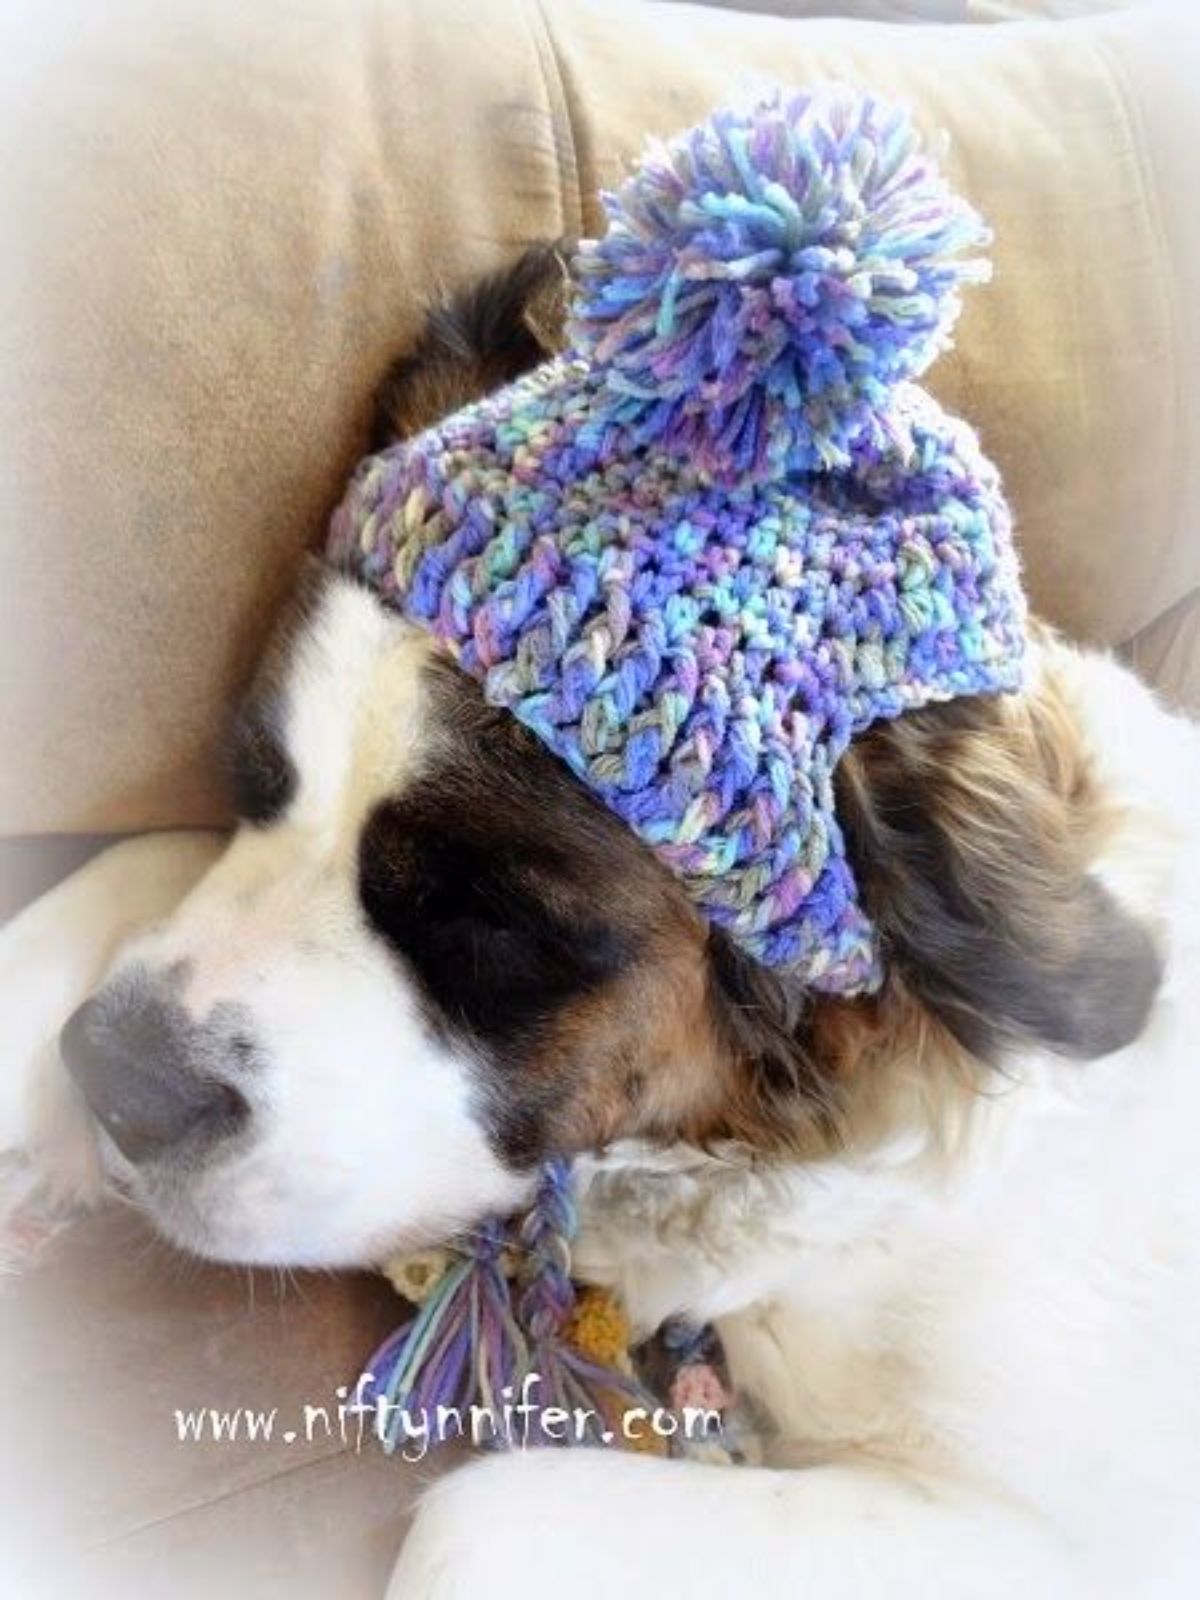 brown black and white dog wearing a purple blue and yellow crocheted hat with a pom pom on the top